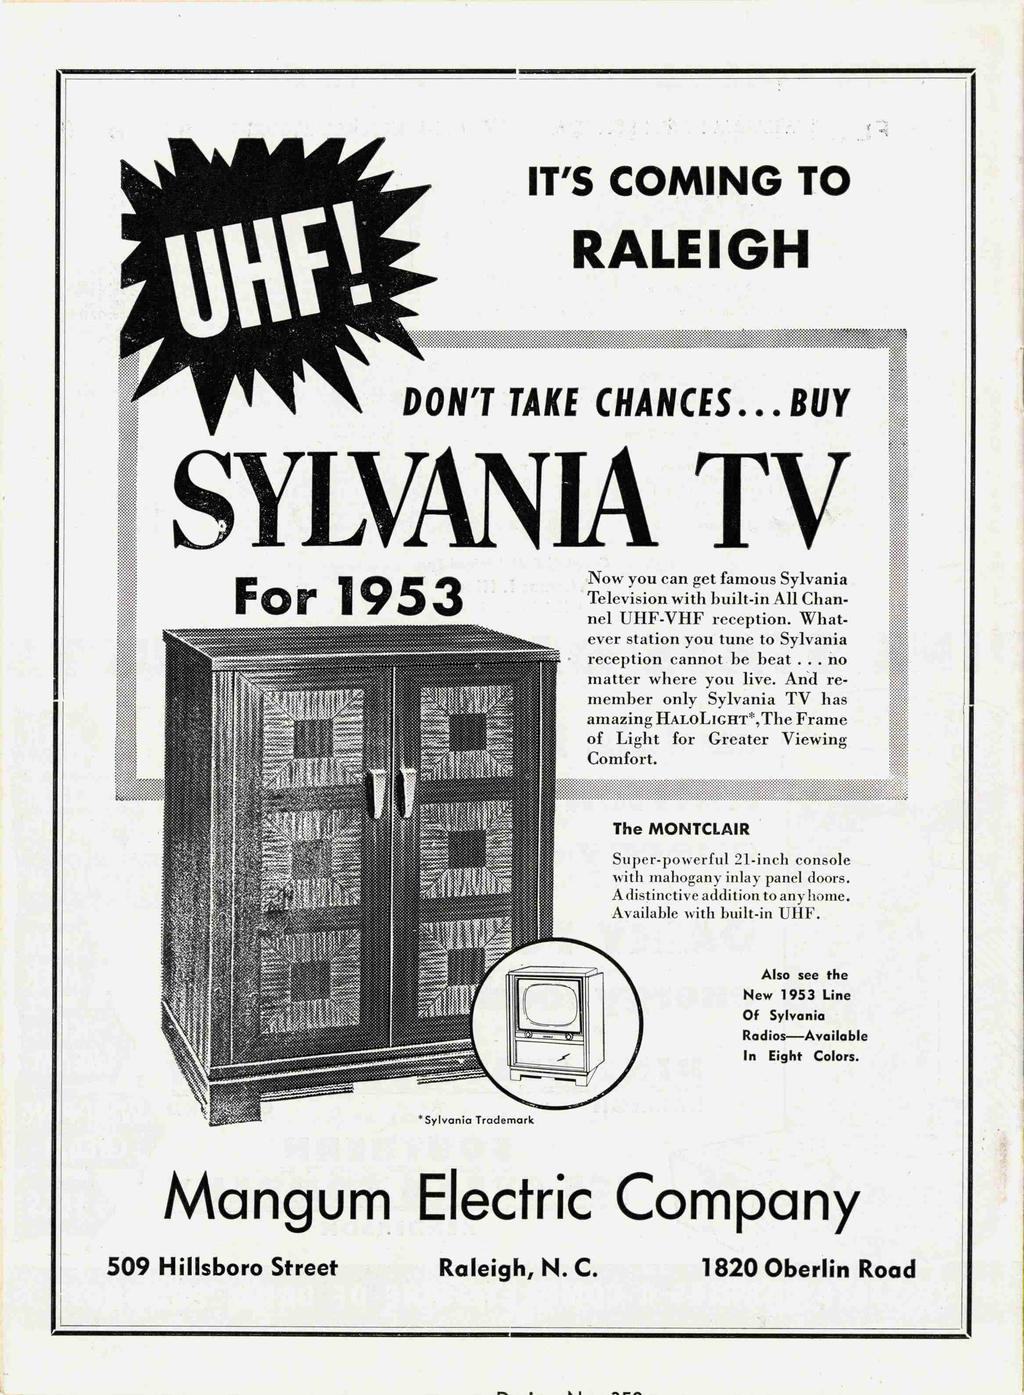 IT S COMING TO RALEIGH BUY LVANlA TV - Now you can get famous Sylvania F o r i 9 Television with built-in All Channel UHF-VHF reception Whatever station you tune to Sylvania reception cannothe heat